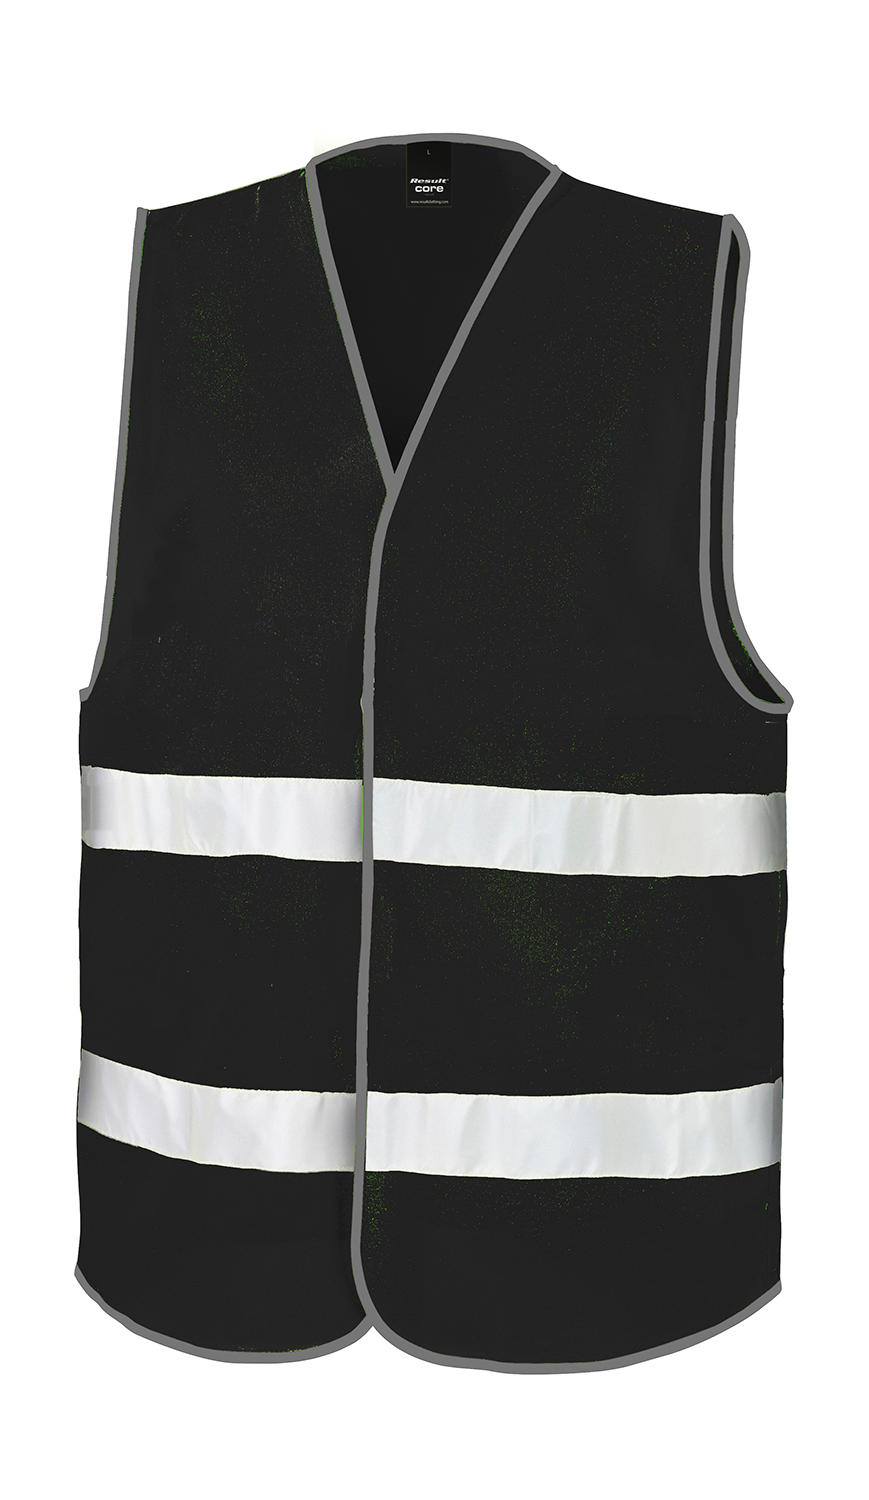  Core Enhanced Visibility Vest in Farbe Black